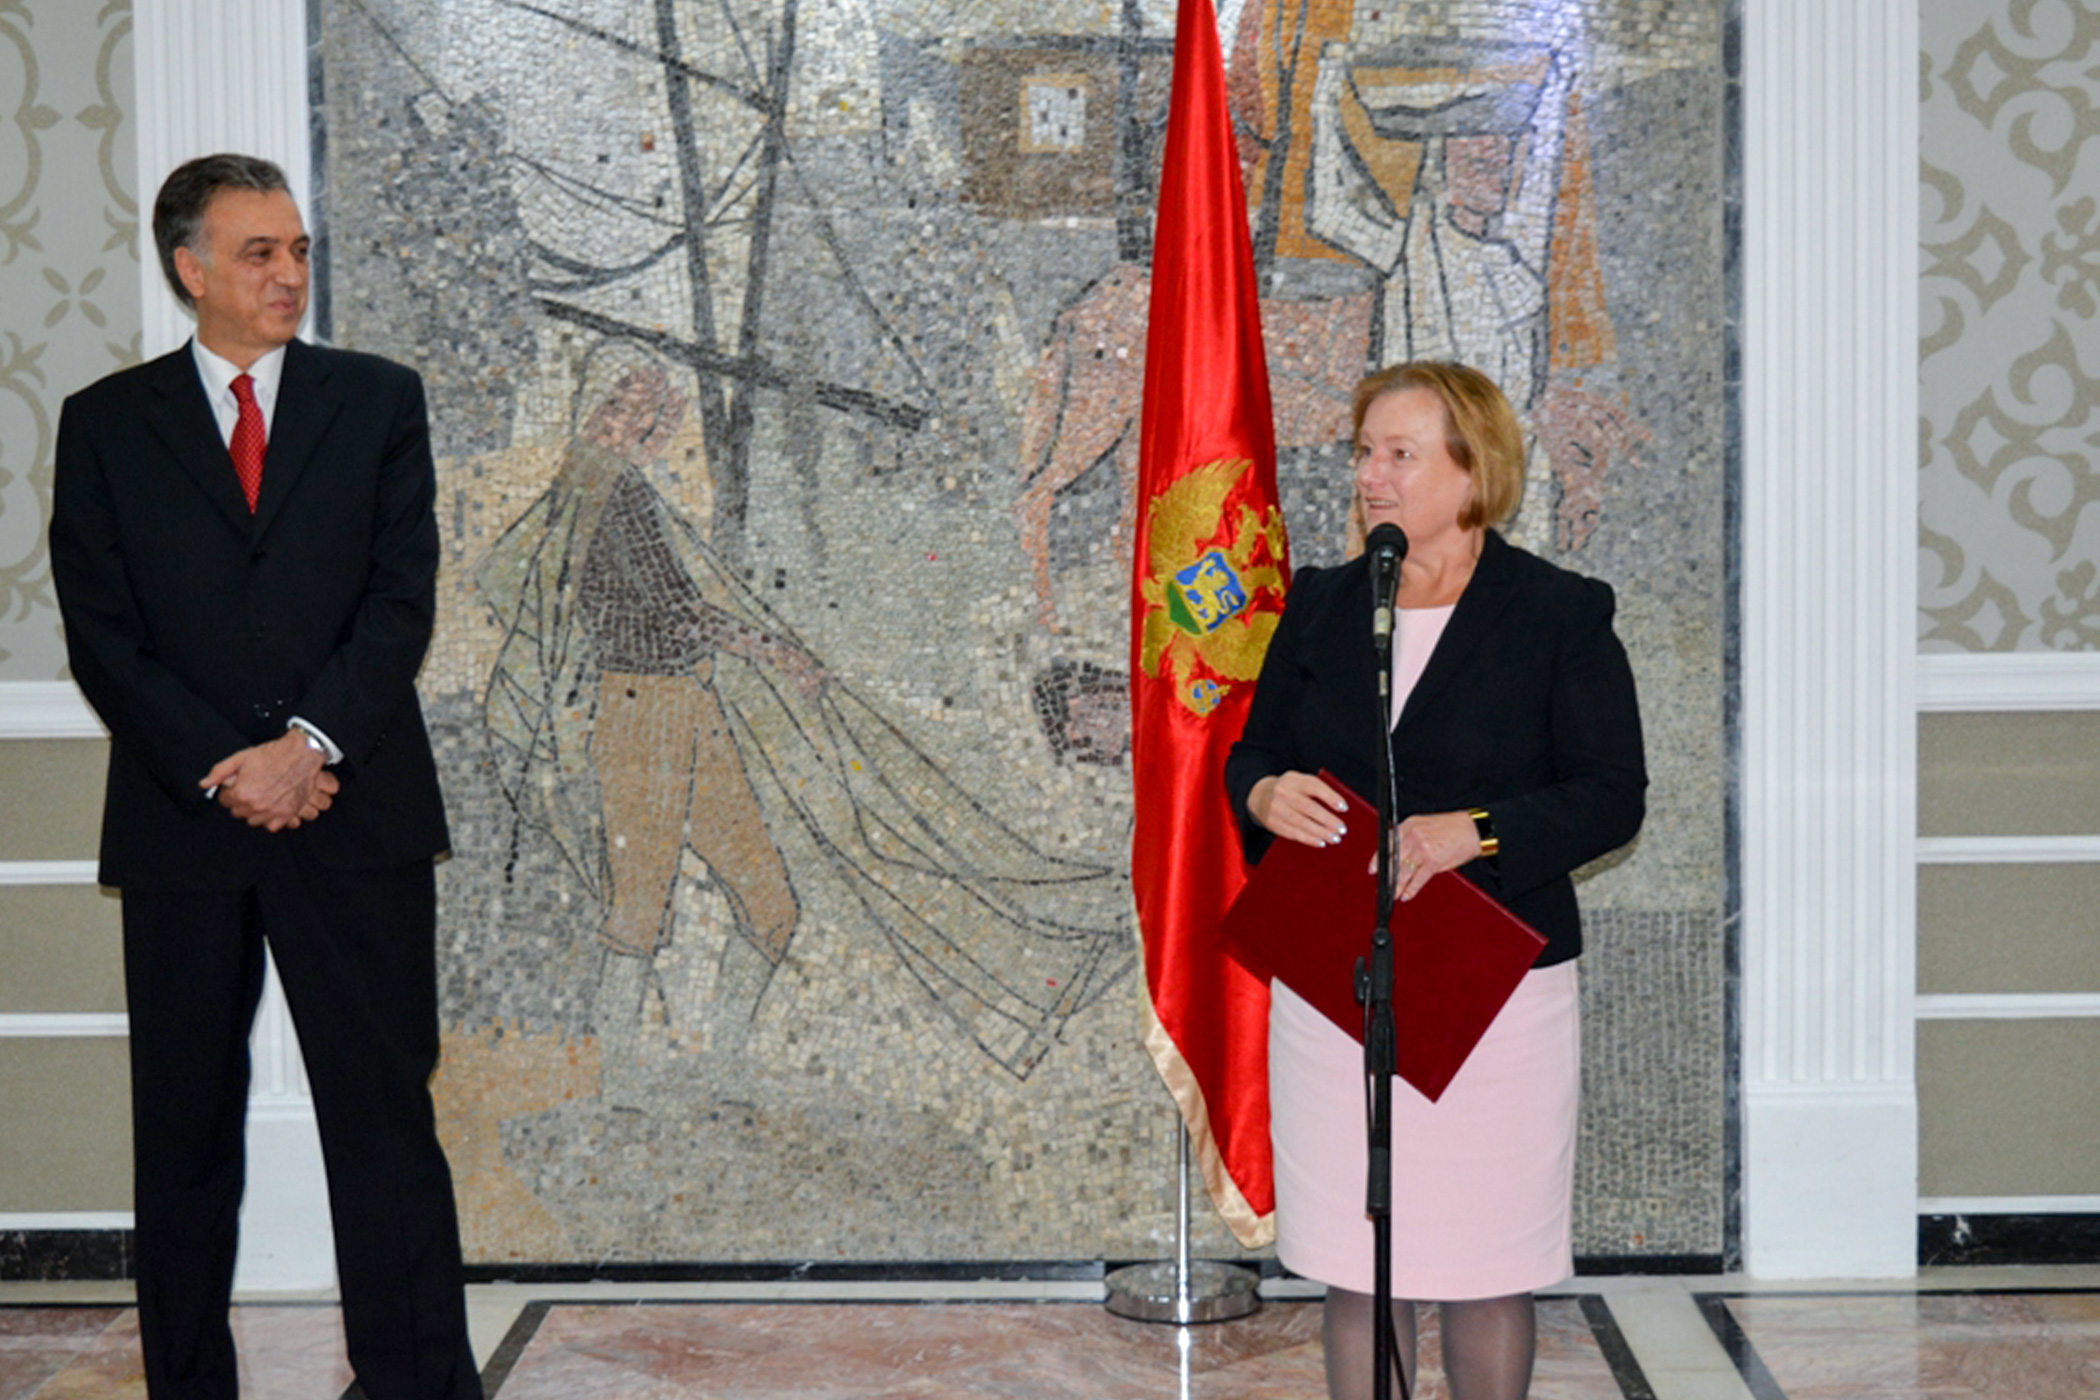 President of Montenegro honors the Voice of America with the National Award of Recognition